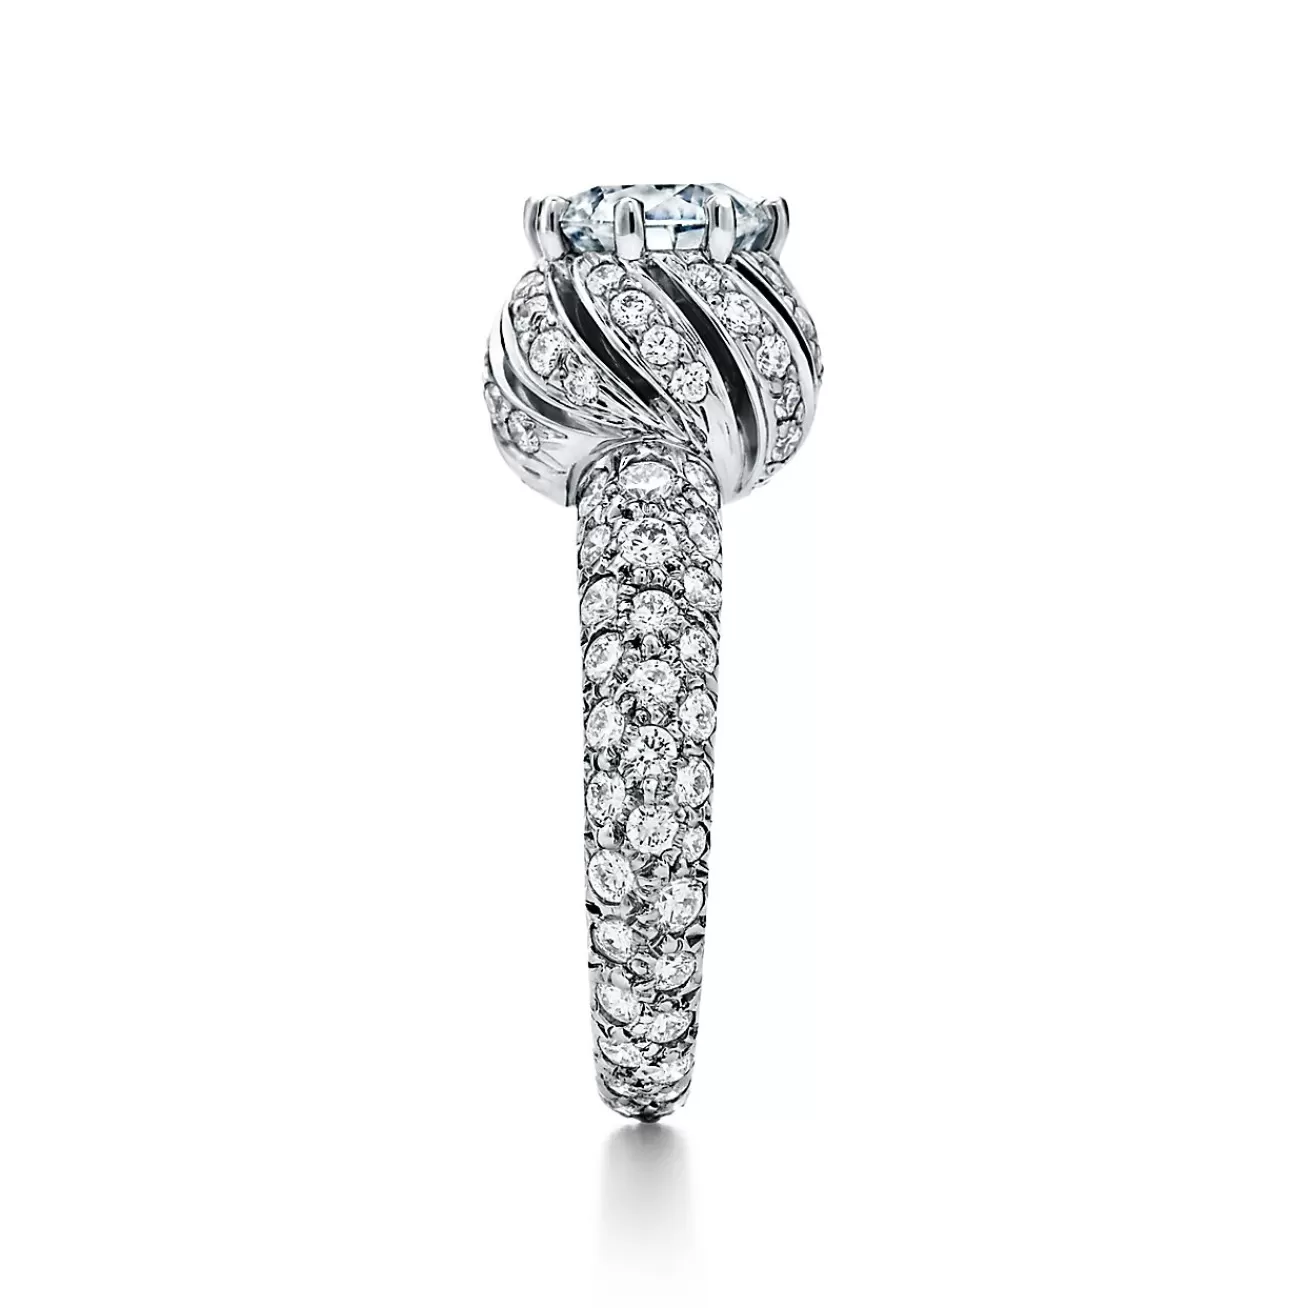 Tiffany & Co. Schlumberger by ™ Buds engagement ring with a diamond platinum band | ^ Jean Schlumberger by Tiffany | Engagement Rings